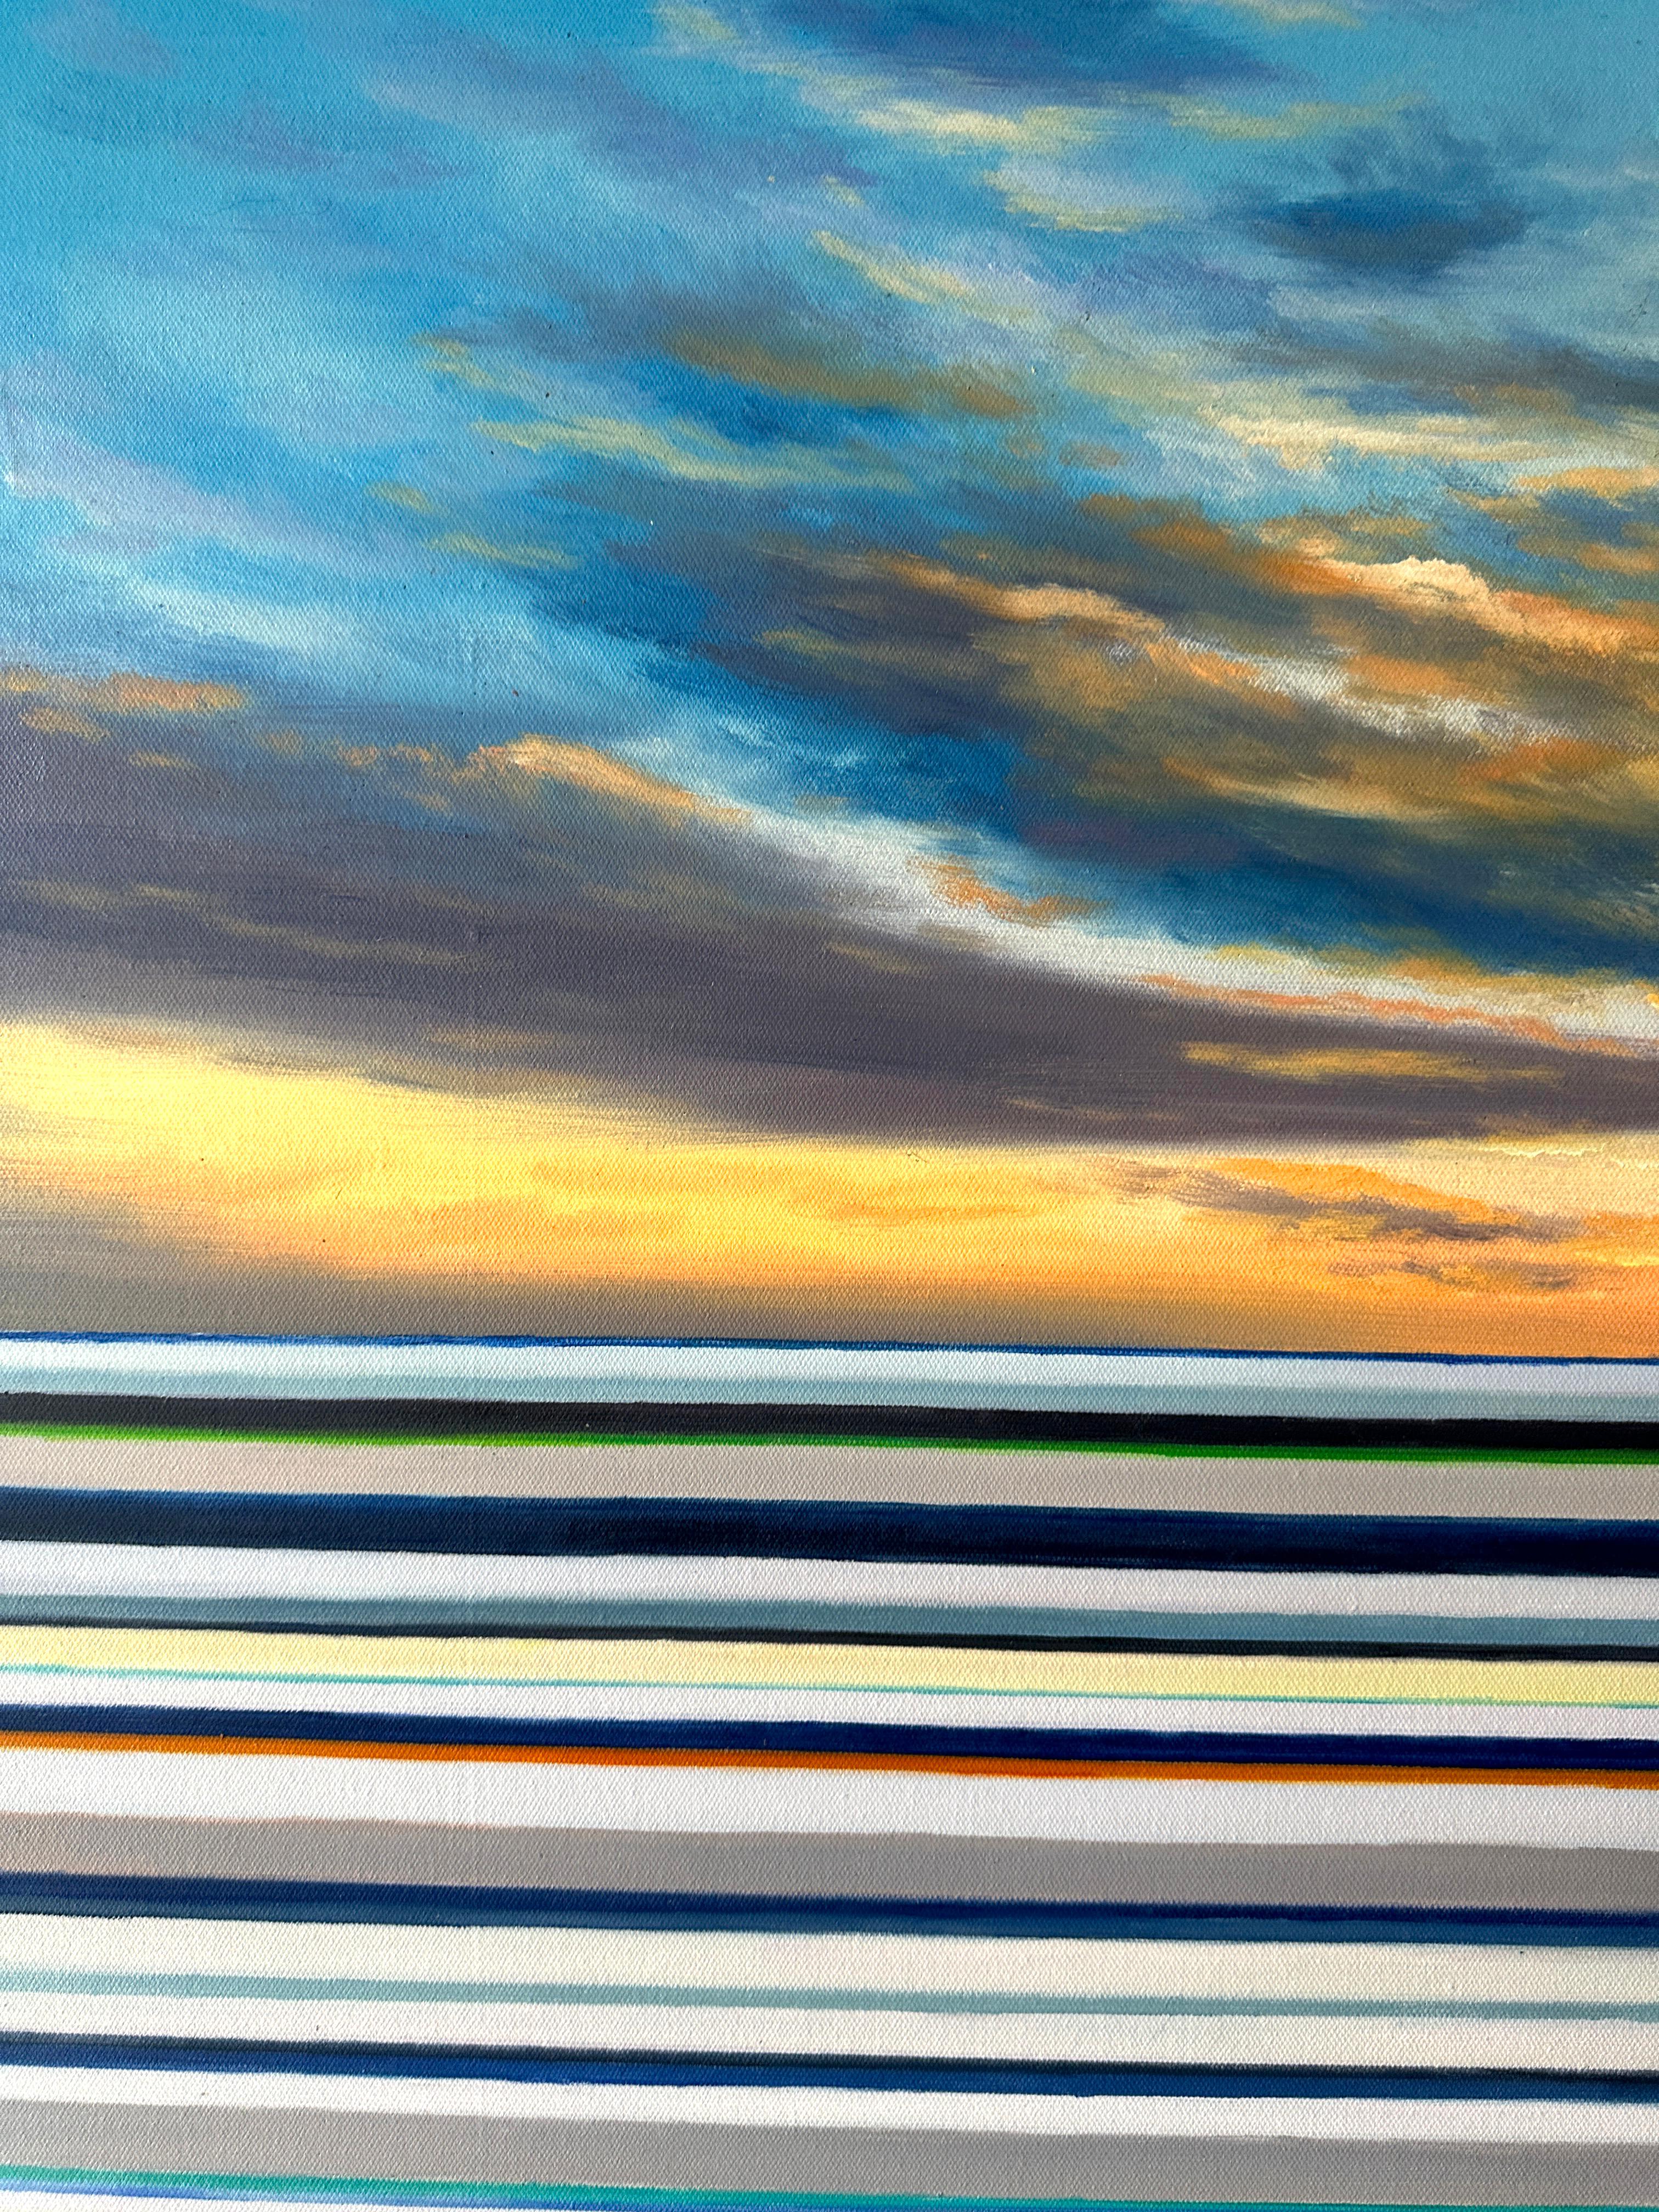 A Dance of Light by Kate Seaborne seascape striped oil painting For Sale 7